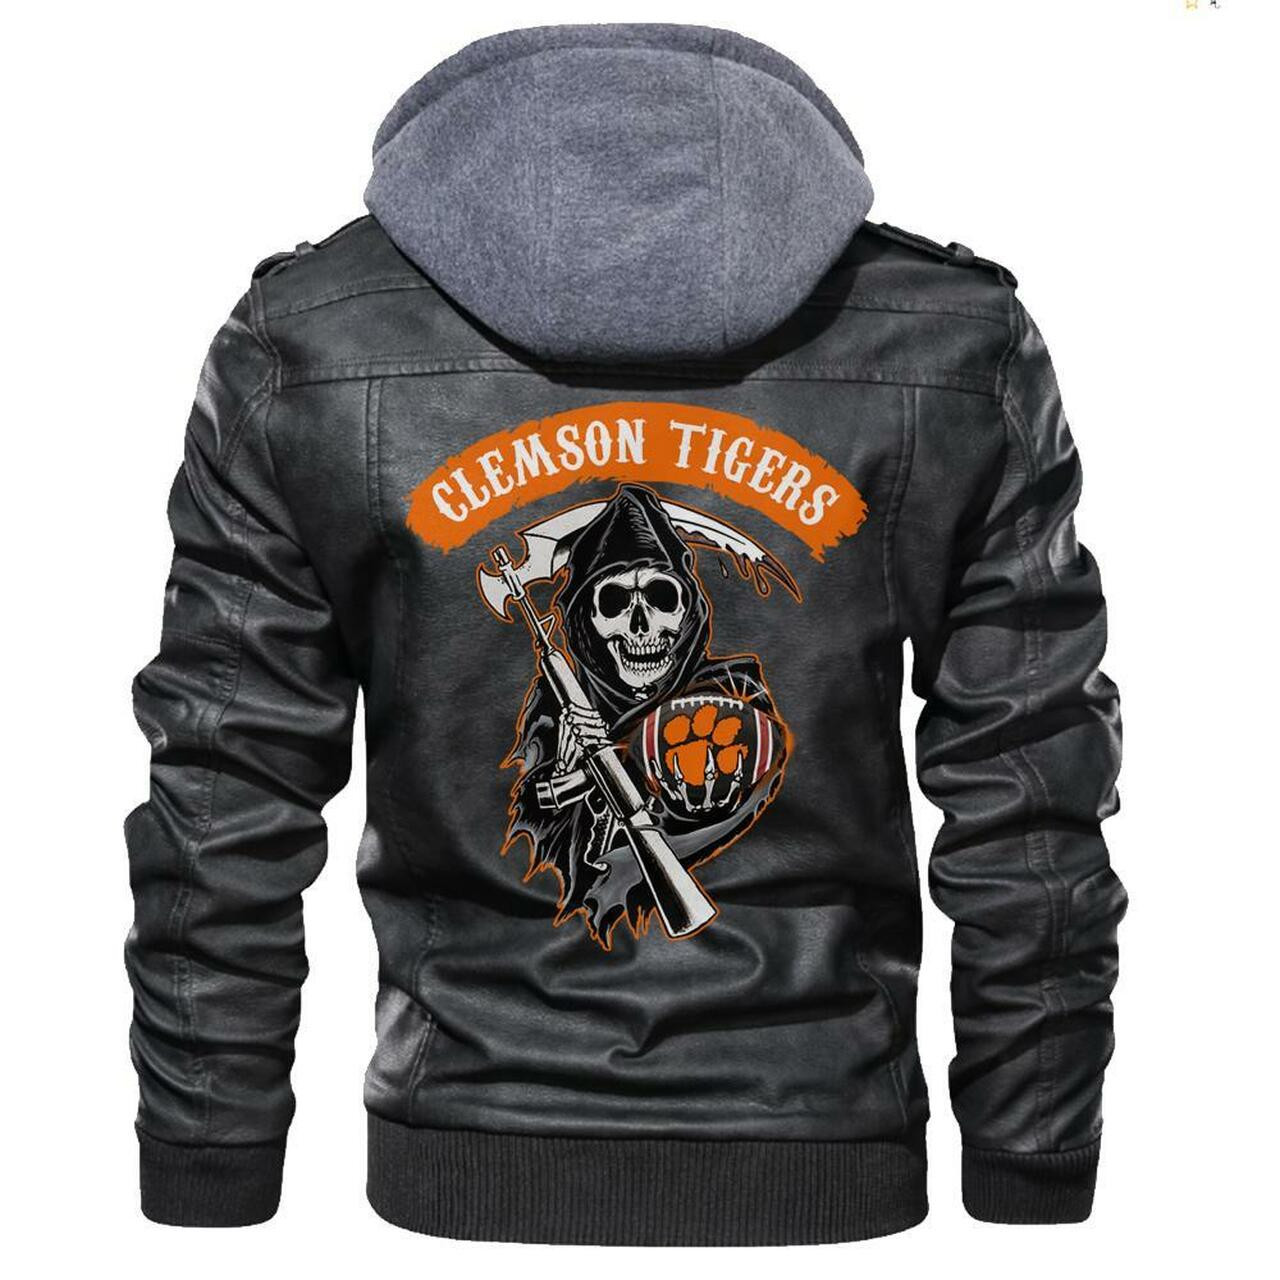 Check out and find the right leather jacket below 43